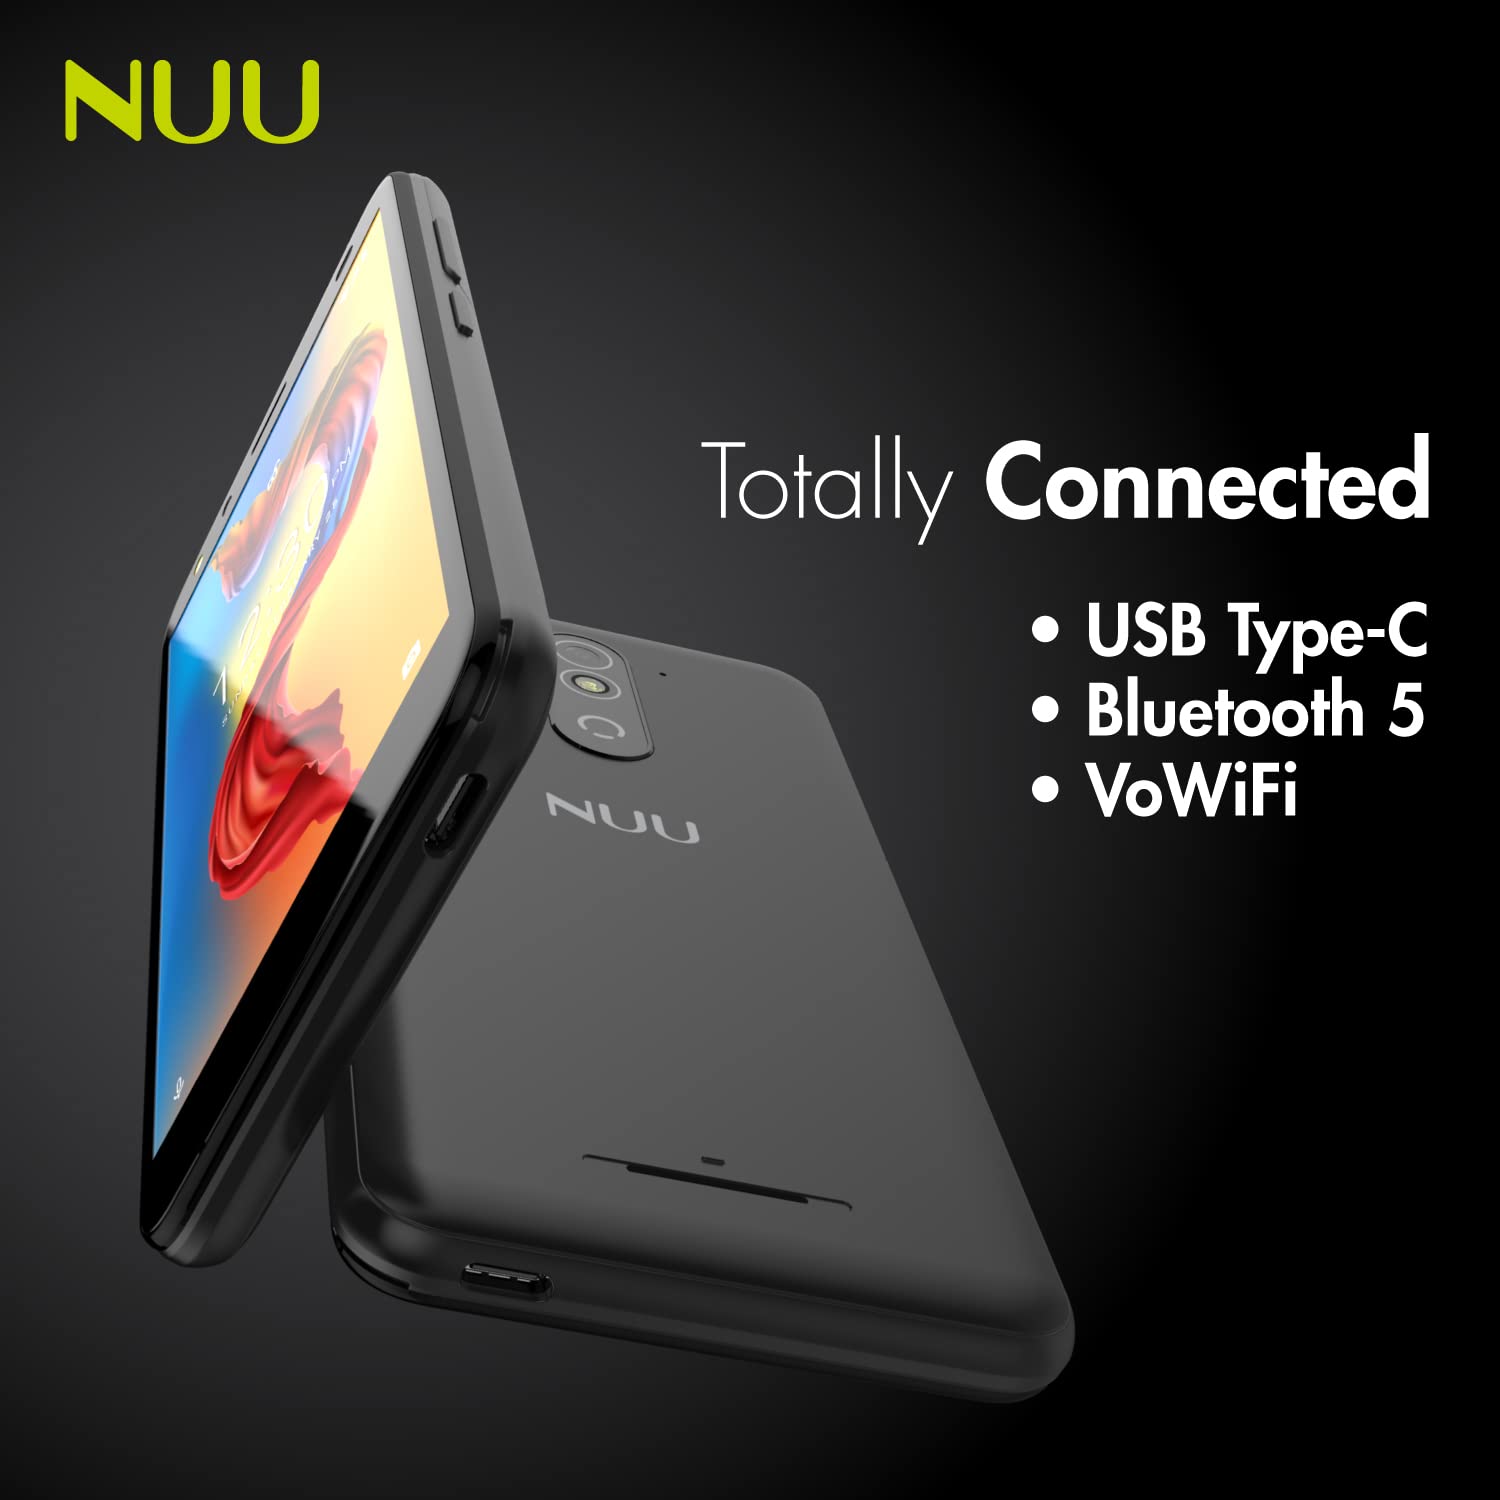 NUU A11L | Unlocked 4G LTE Smartphone|5.45'' HD Display | 16GB + 2GB RAM | 2500 mAh Battery | Android 11 Go Edition | Compatible with Verizon and T-Mobile